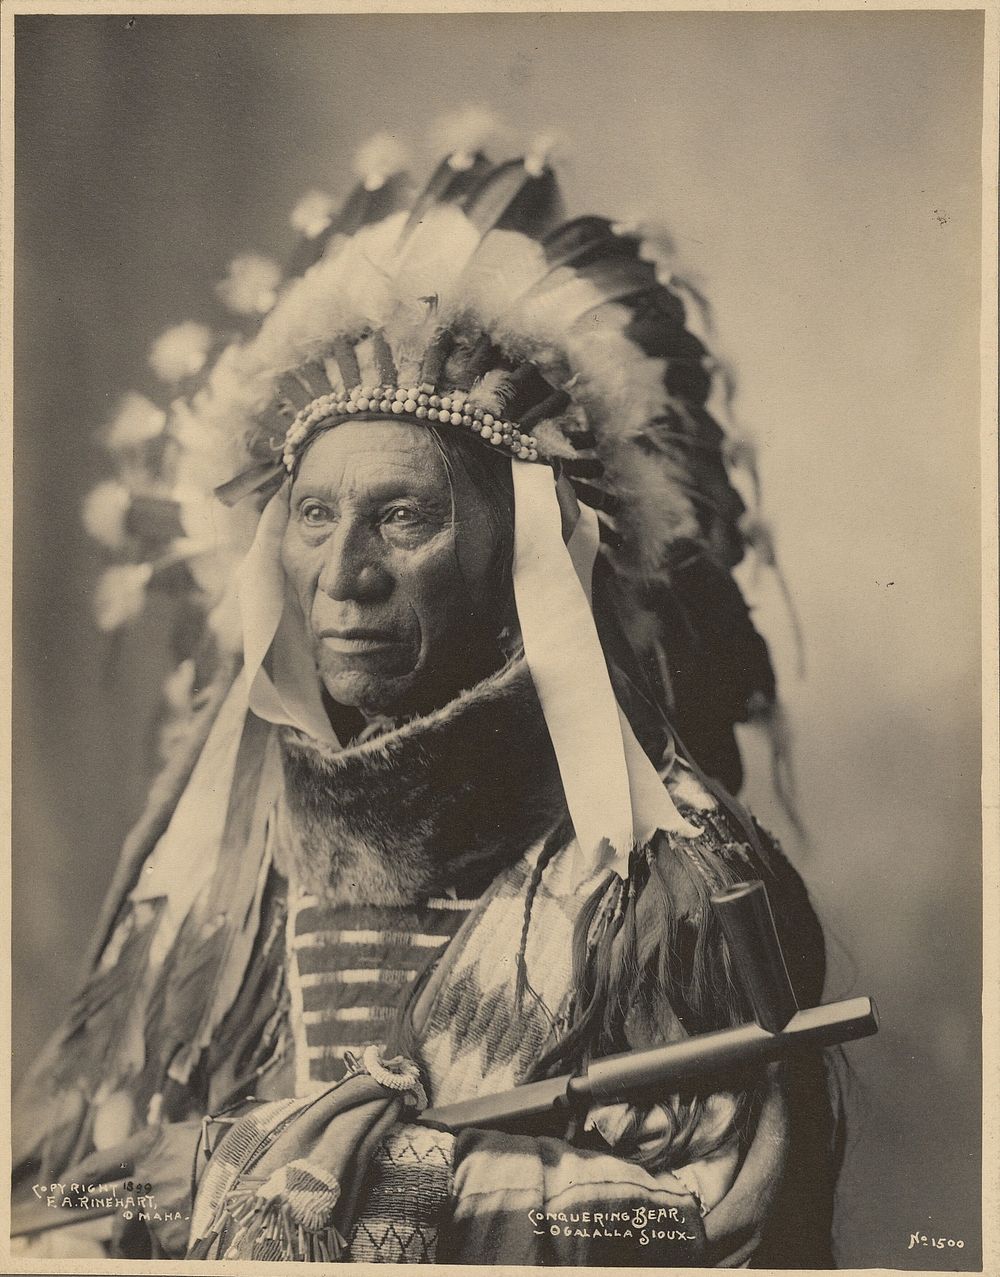 Conquering Bear, Ogalalla Sioux by Adolph F Muhr and Frank A Rinehart